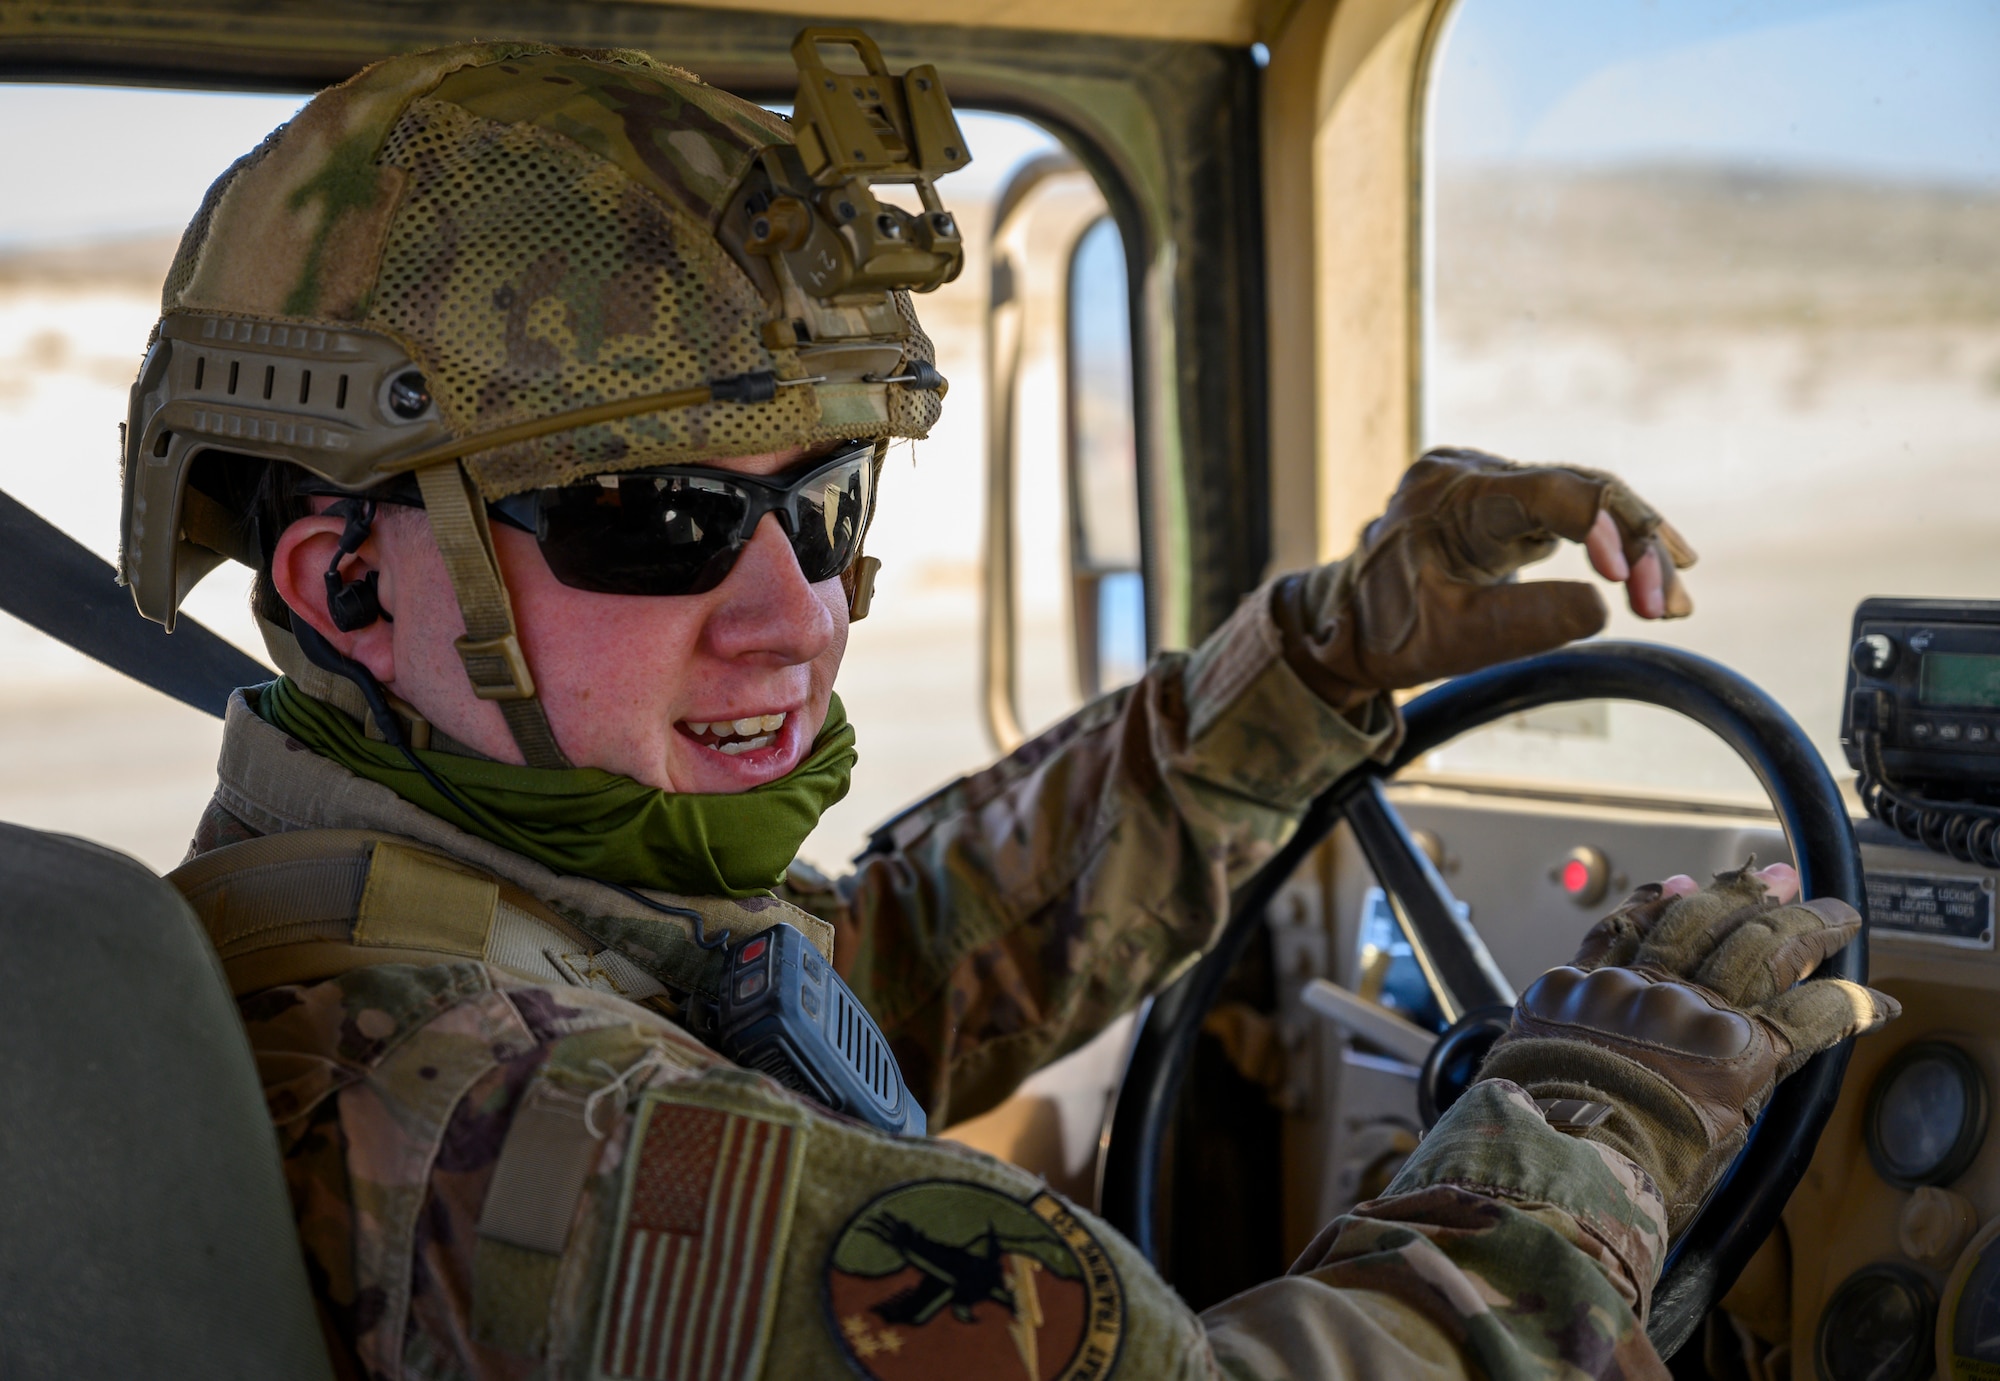 Airman smiles while seated behind the steering wheel of a Humvee.